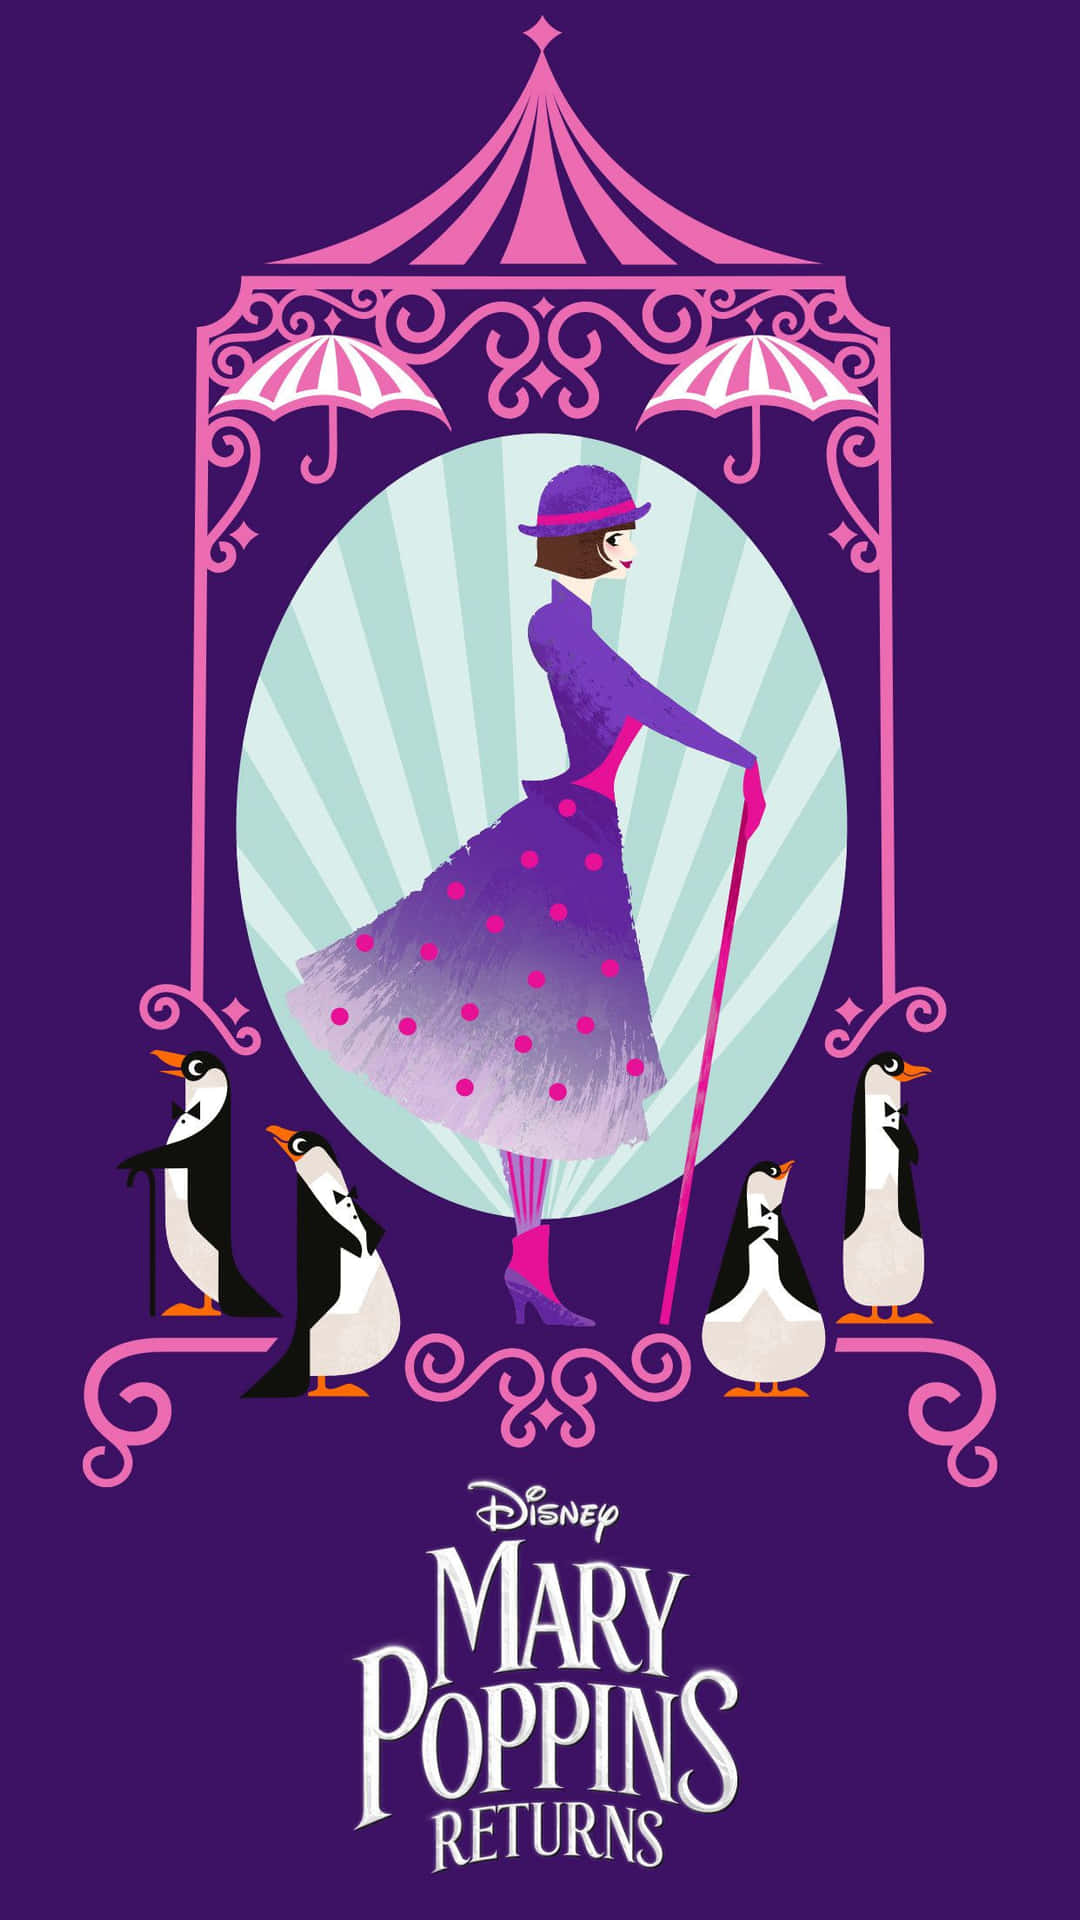 Mary Poppins Flying in the Sky with Umbrella Wallpaper